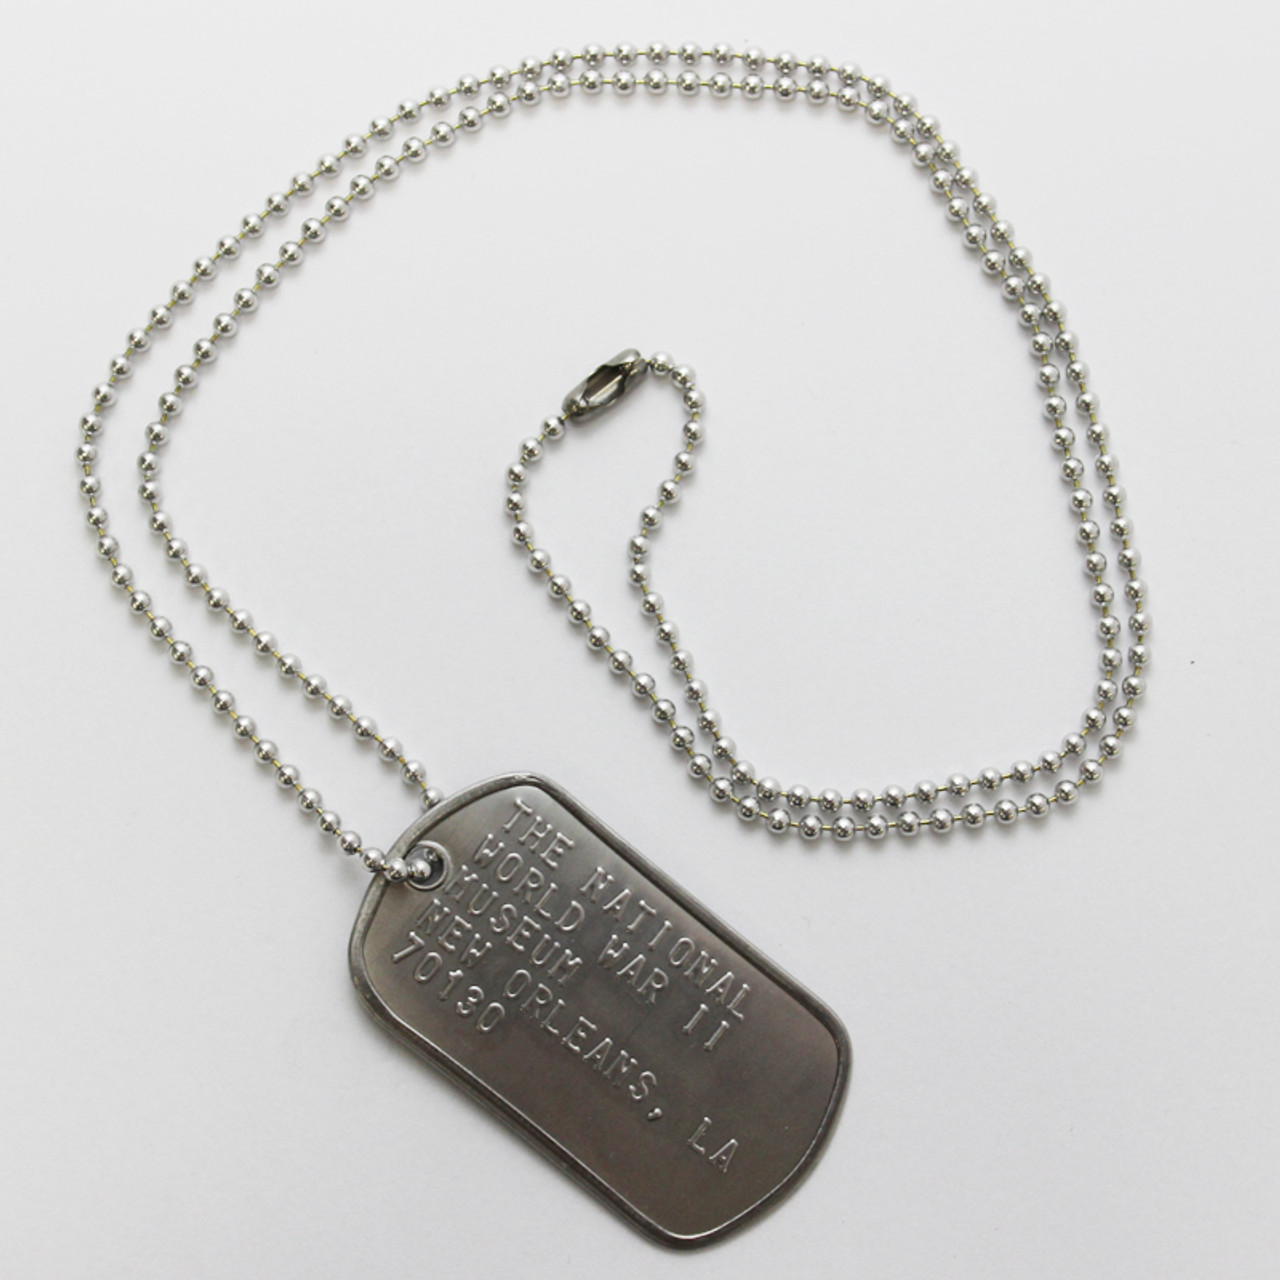 Custom Dog Tag Single - The National WWII Museum